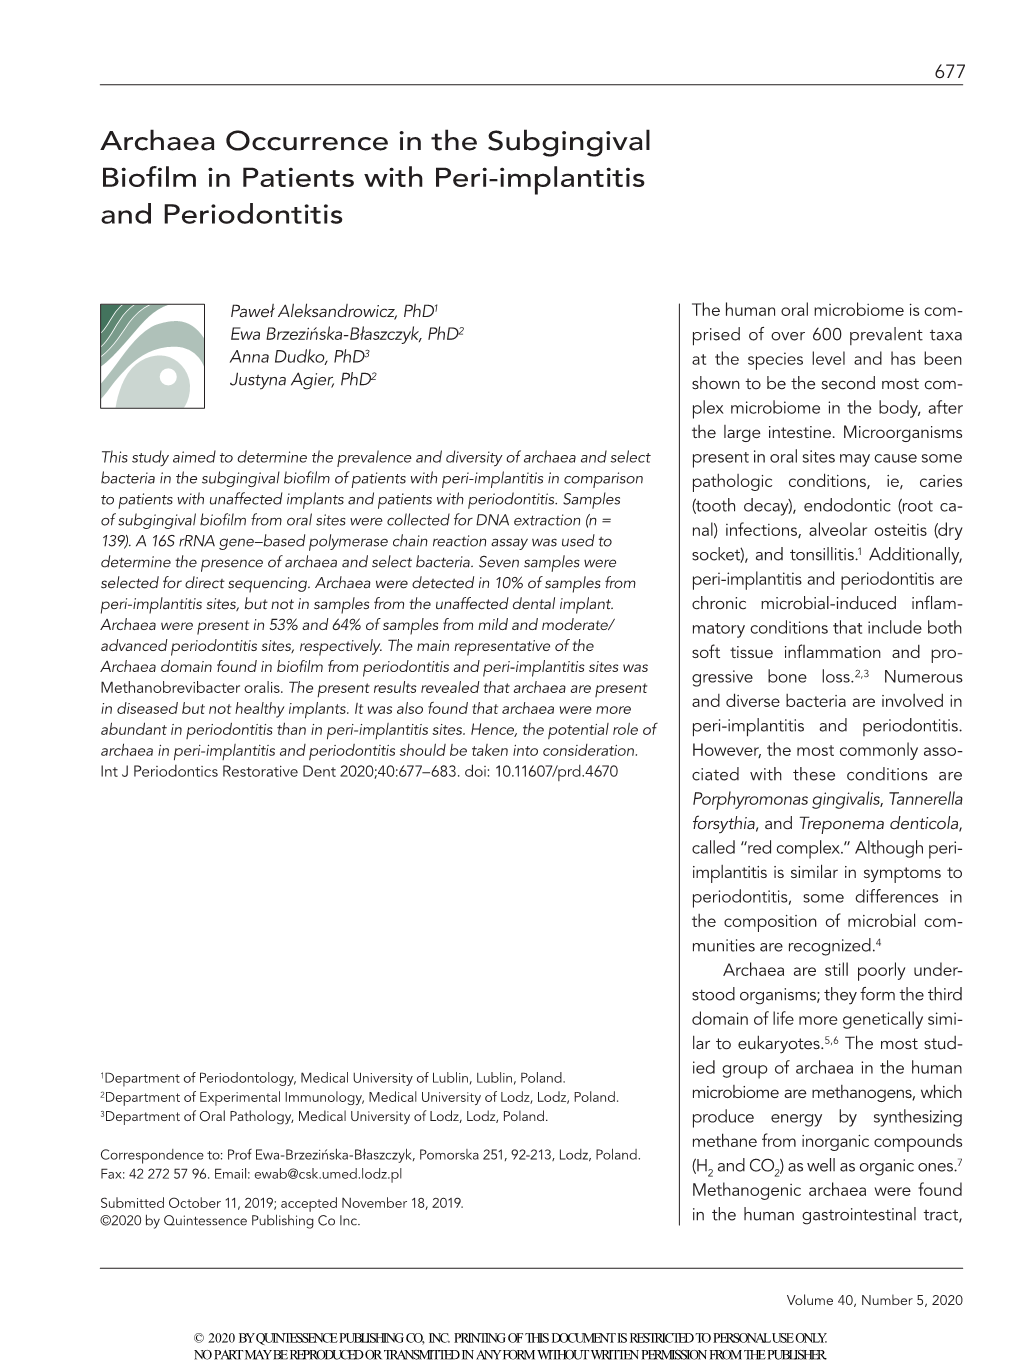 Archaea Occurrence in the Subgingival Biofilm in Patients with Peri-Implantitis and Periodontitis